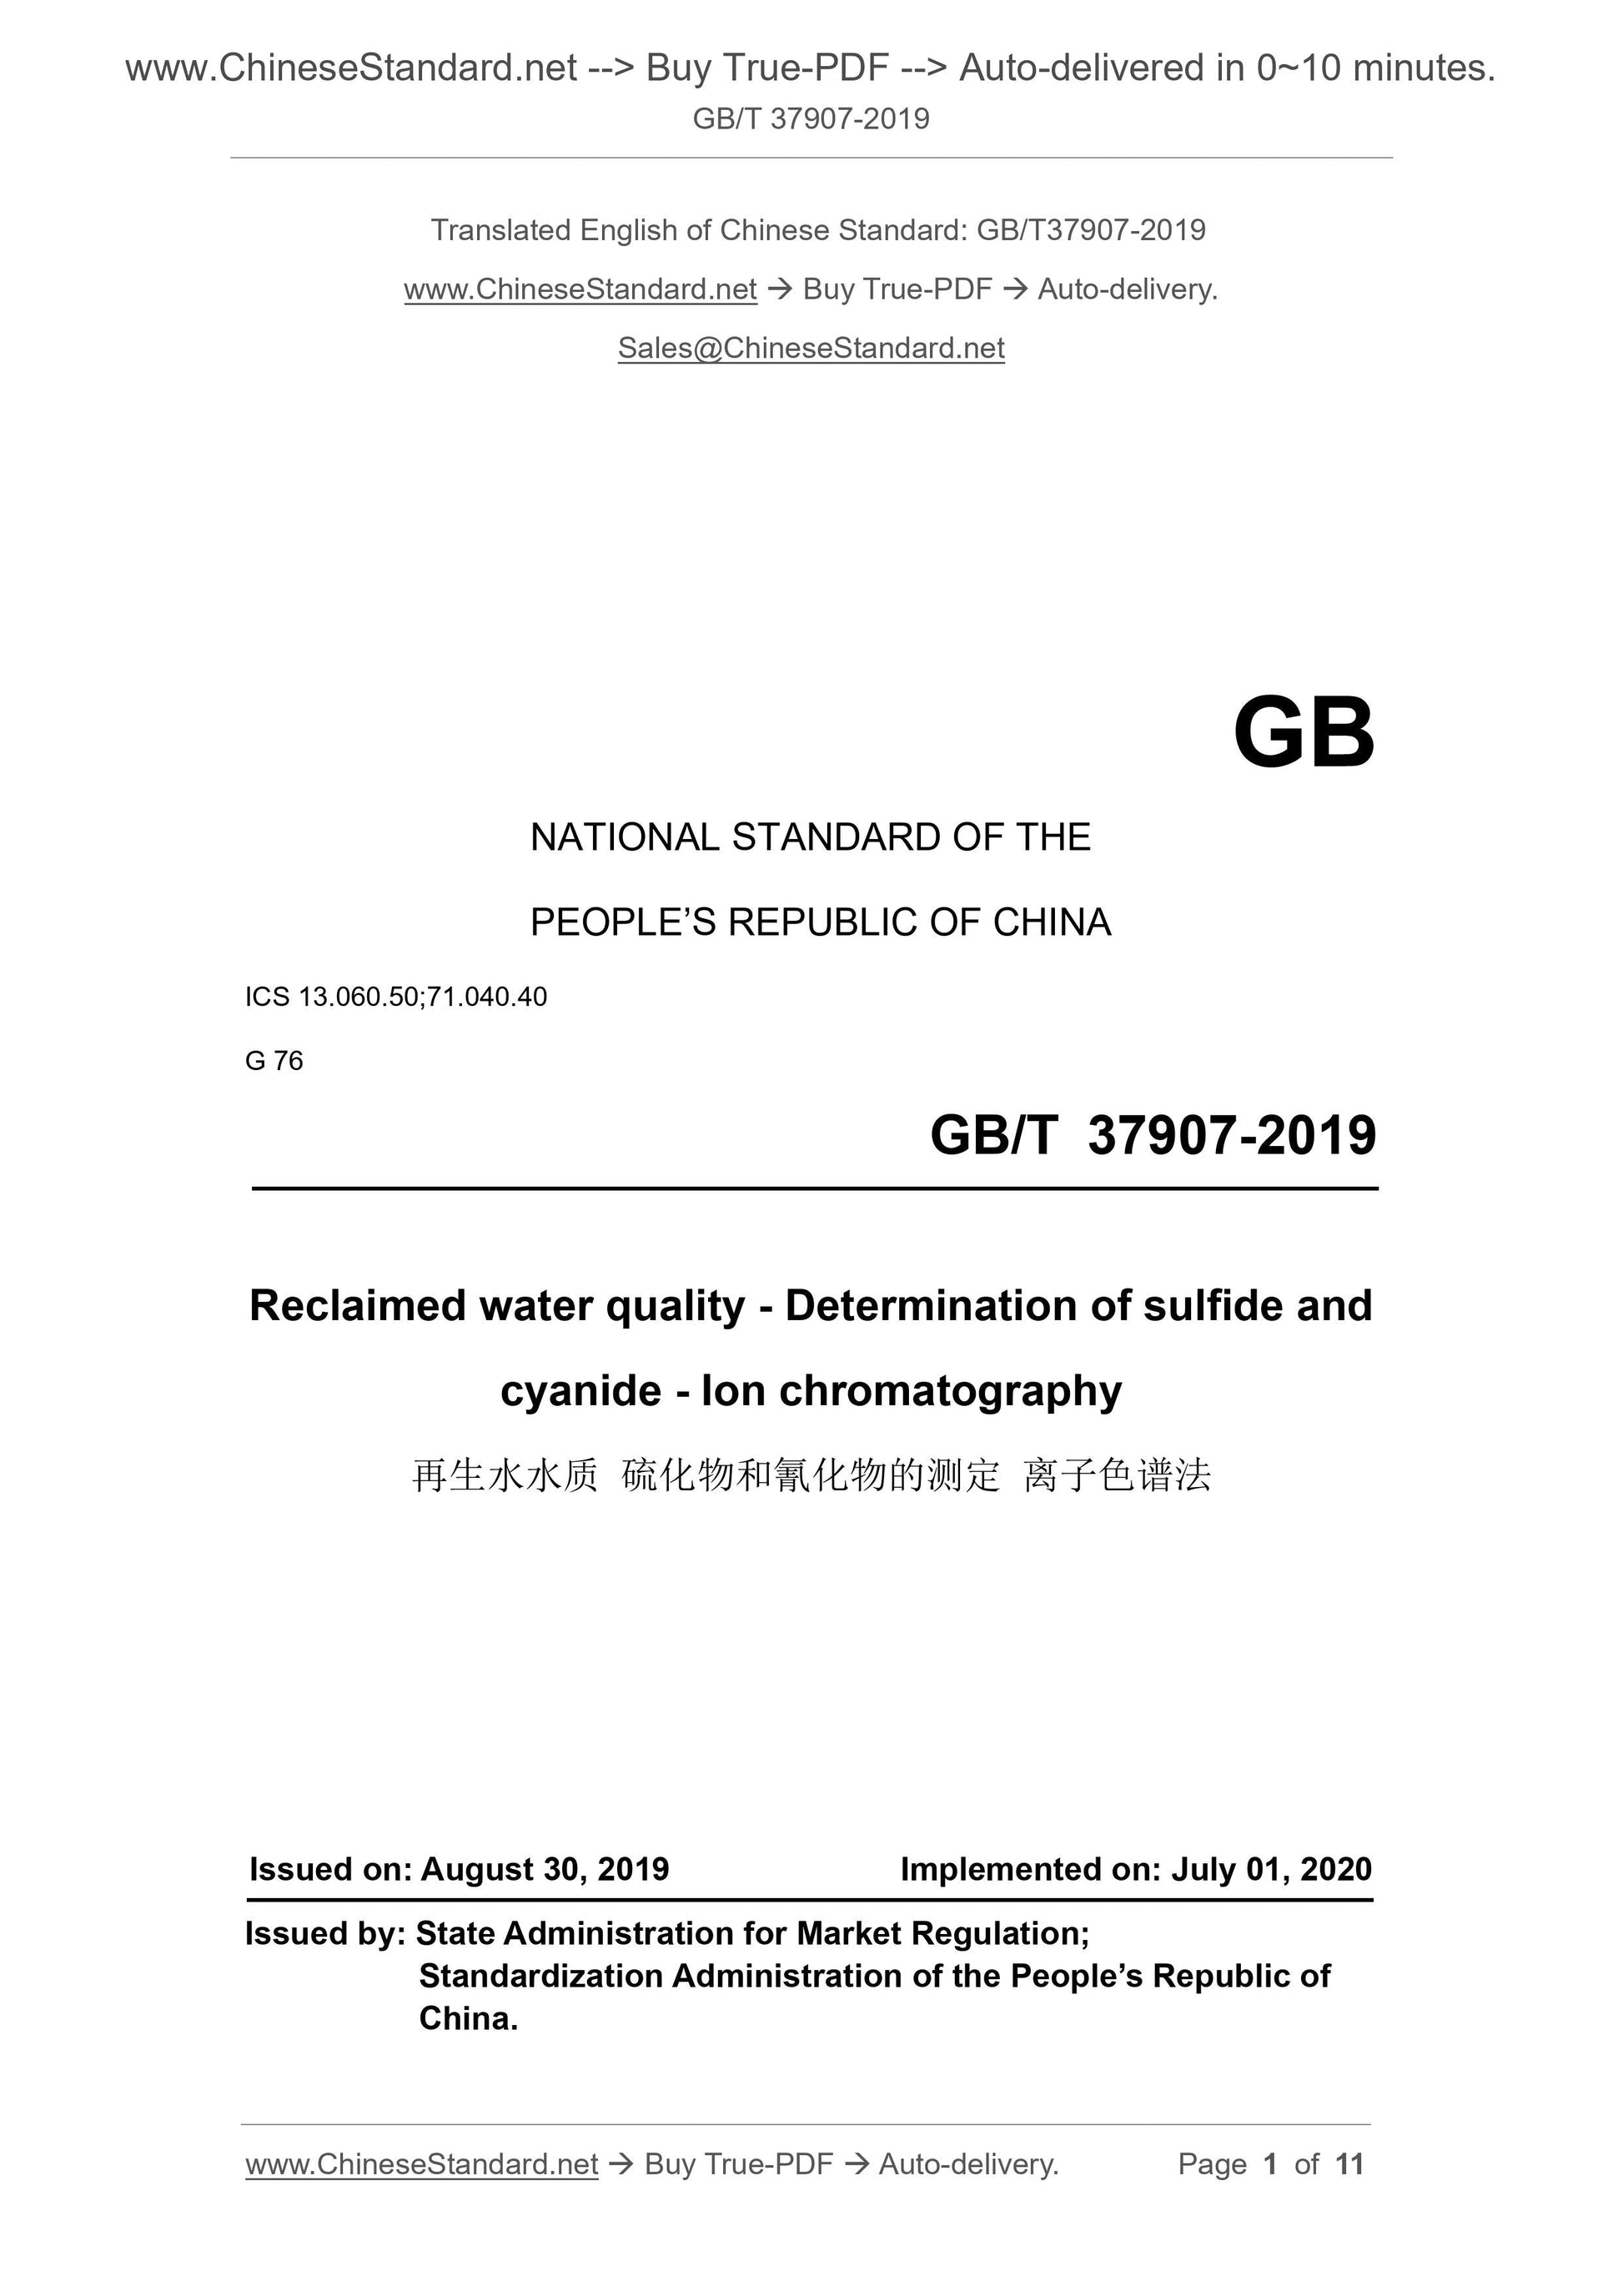 GB/T 37907-2019 Page 1